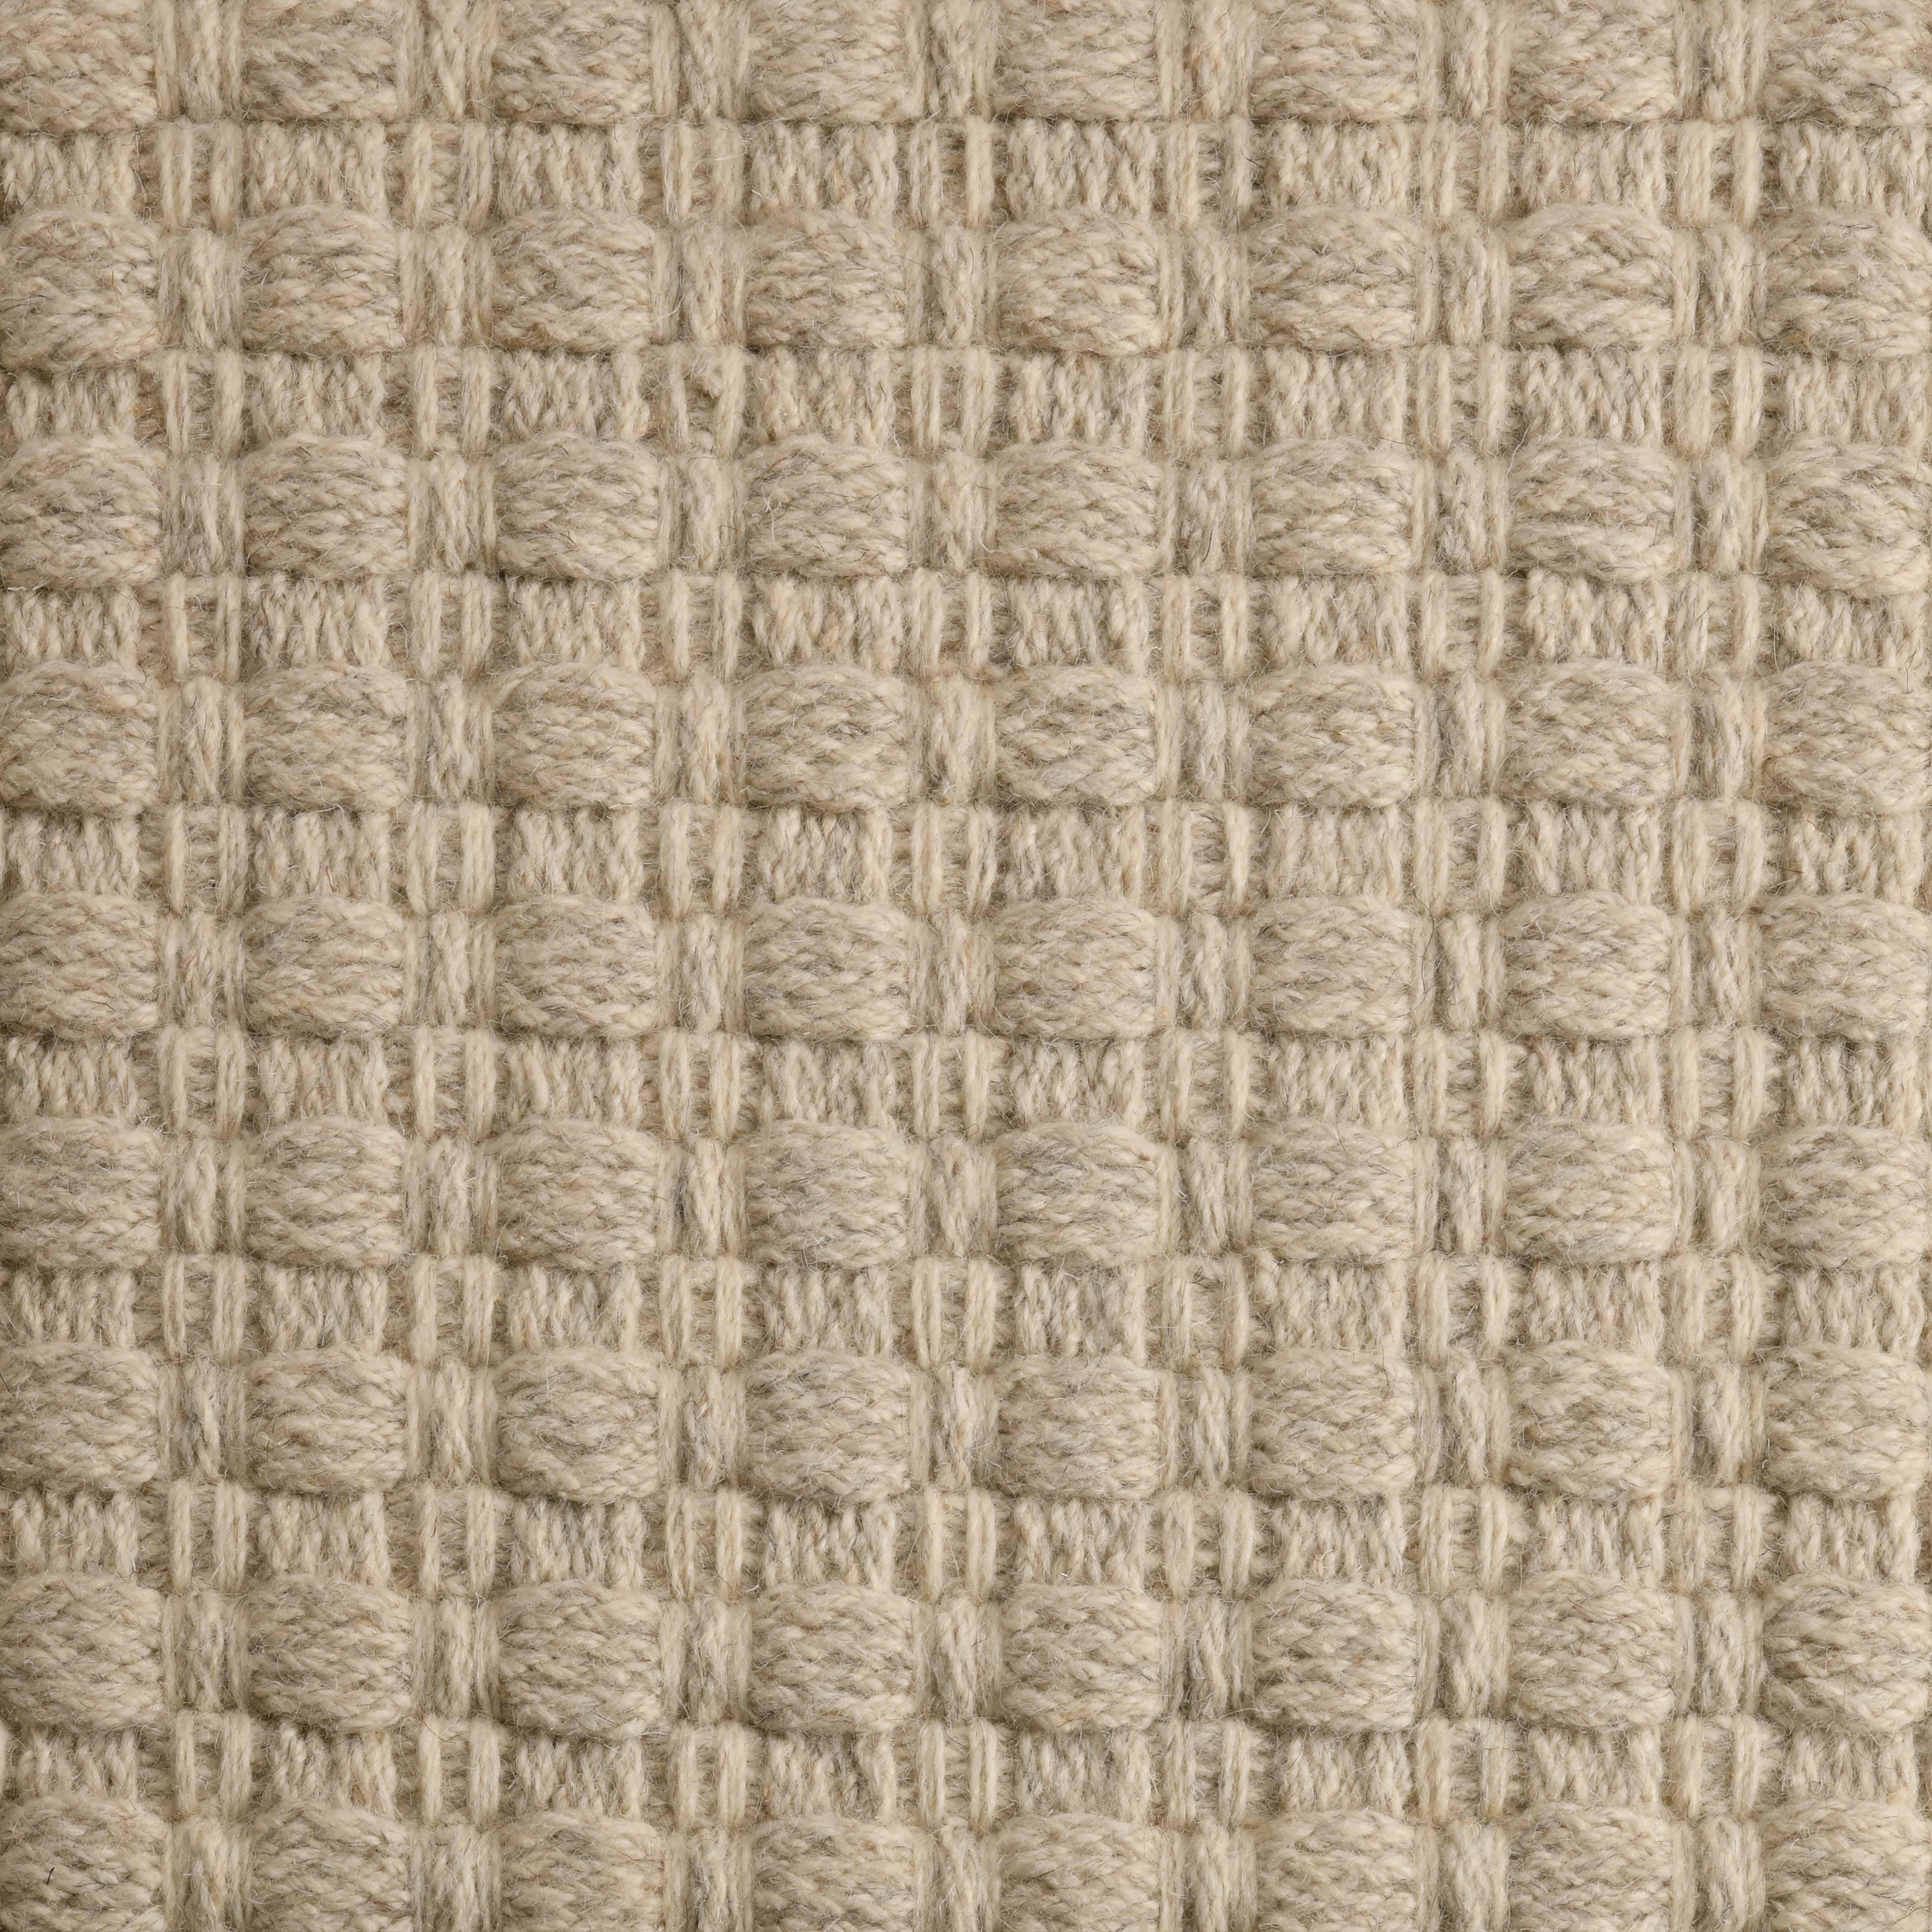 Una, Ash, Handwoven Face 60% Undyed NZ Wool, 40% Undyed MED Wool, 8' x 10' For Sale